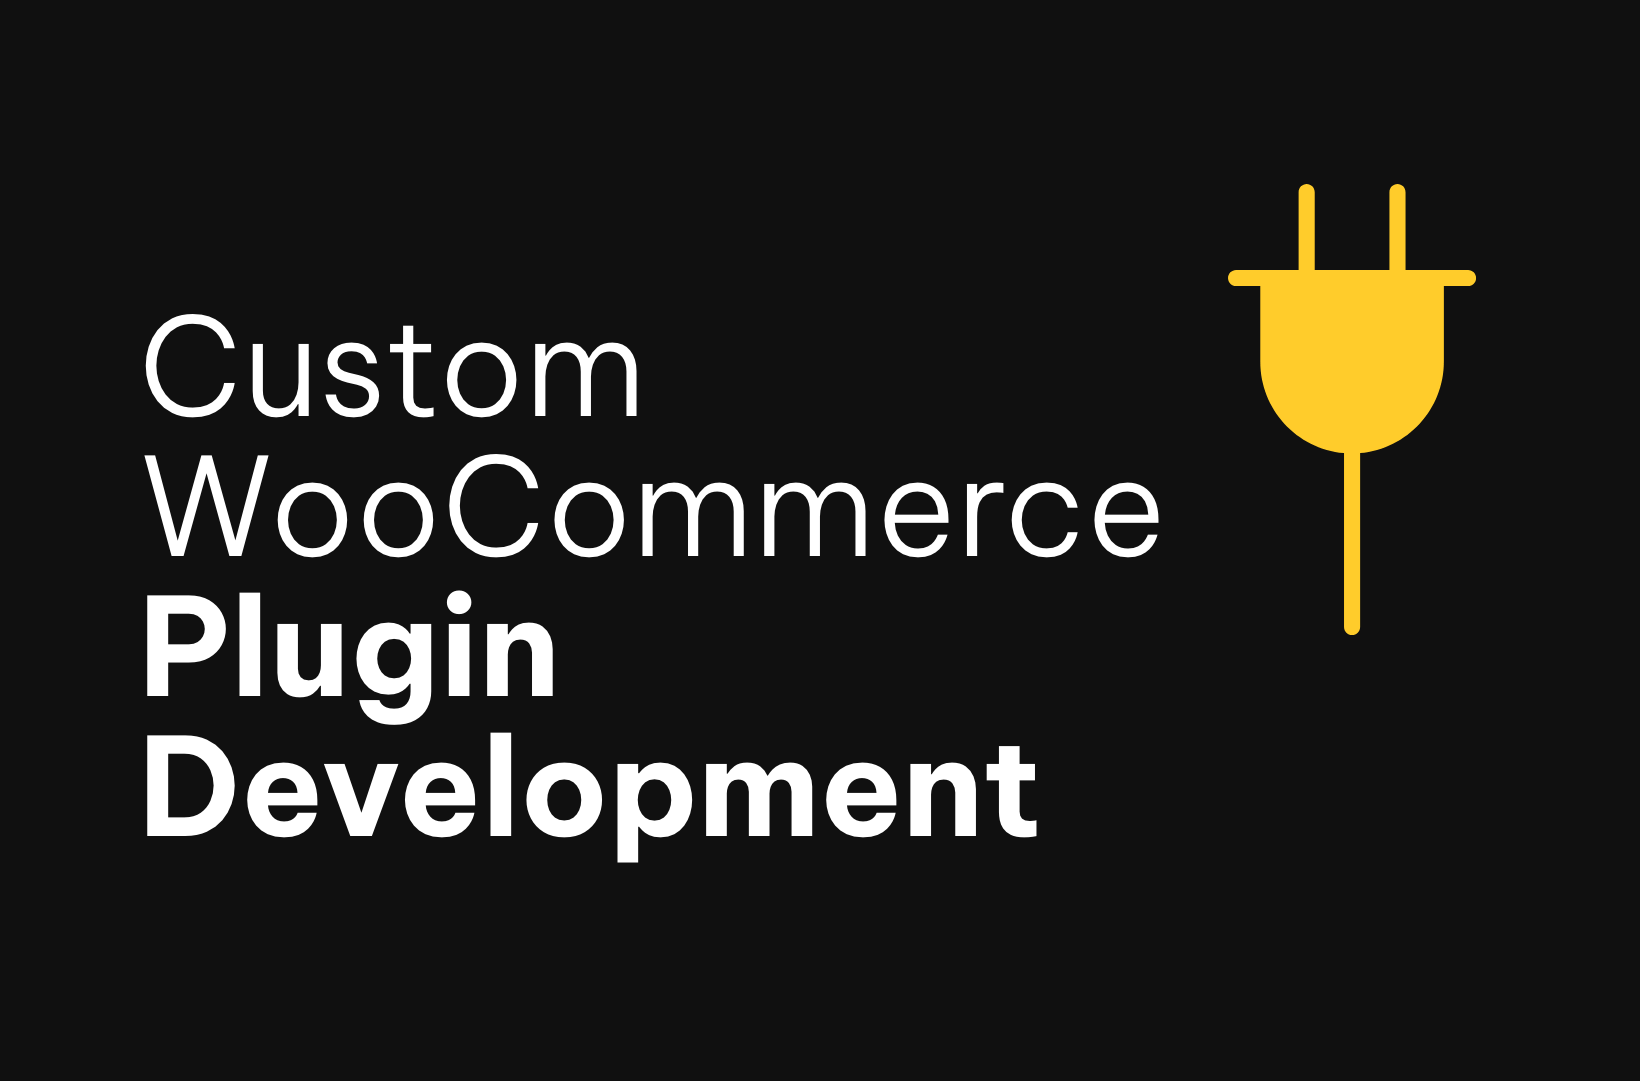 Step-By-Step Journey into WooCommerce Plugin Development